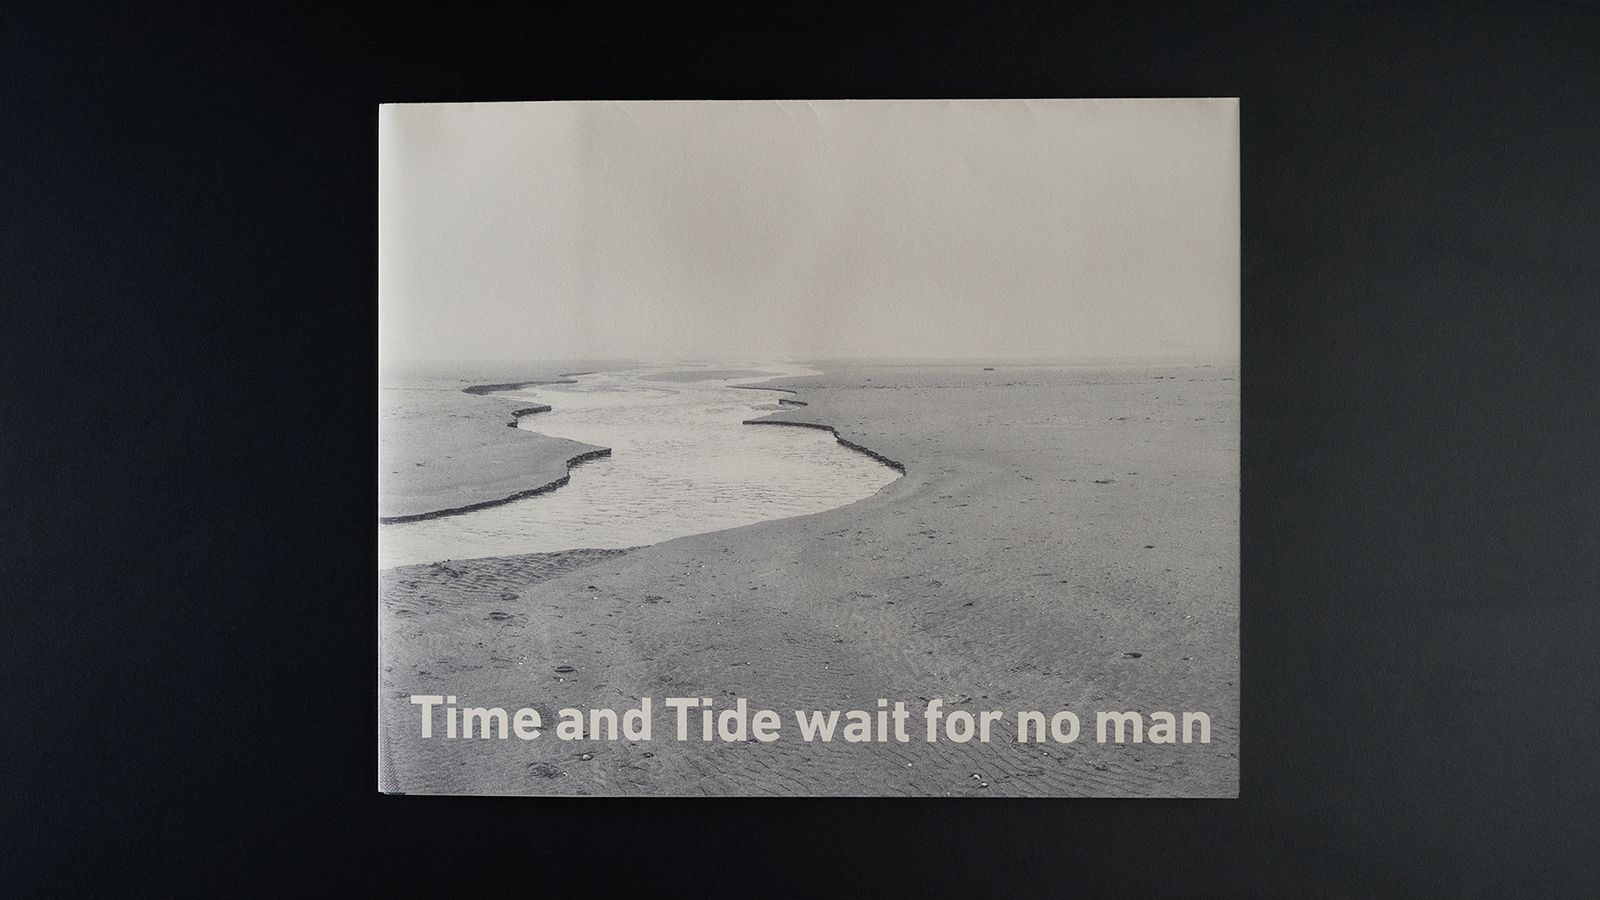 Time and tide wait for no man - cover.jpg